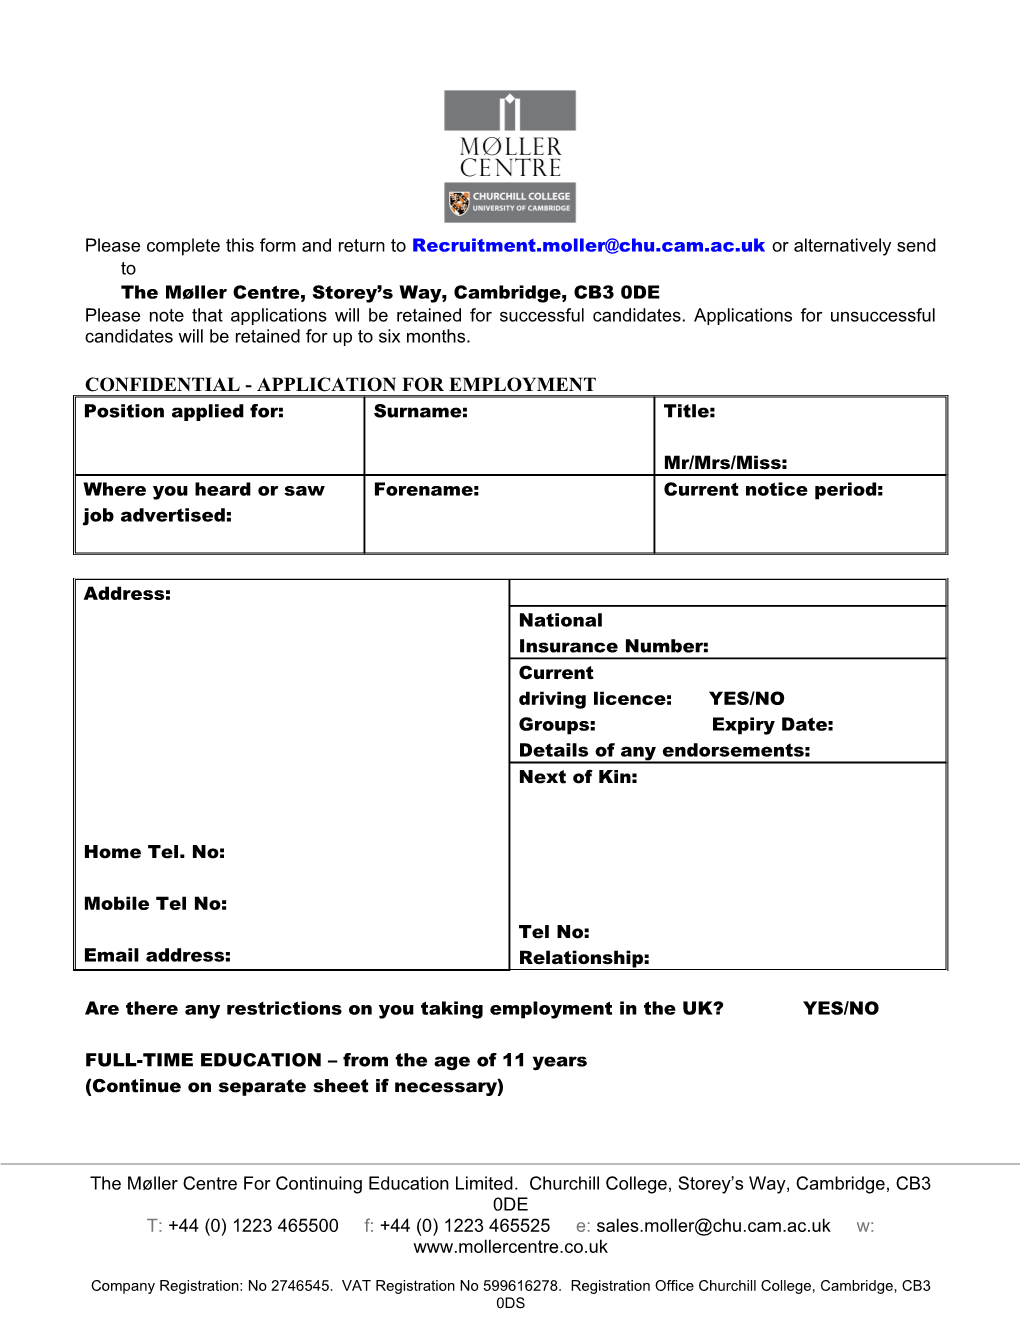 Confidential - Application for Employment s1